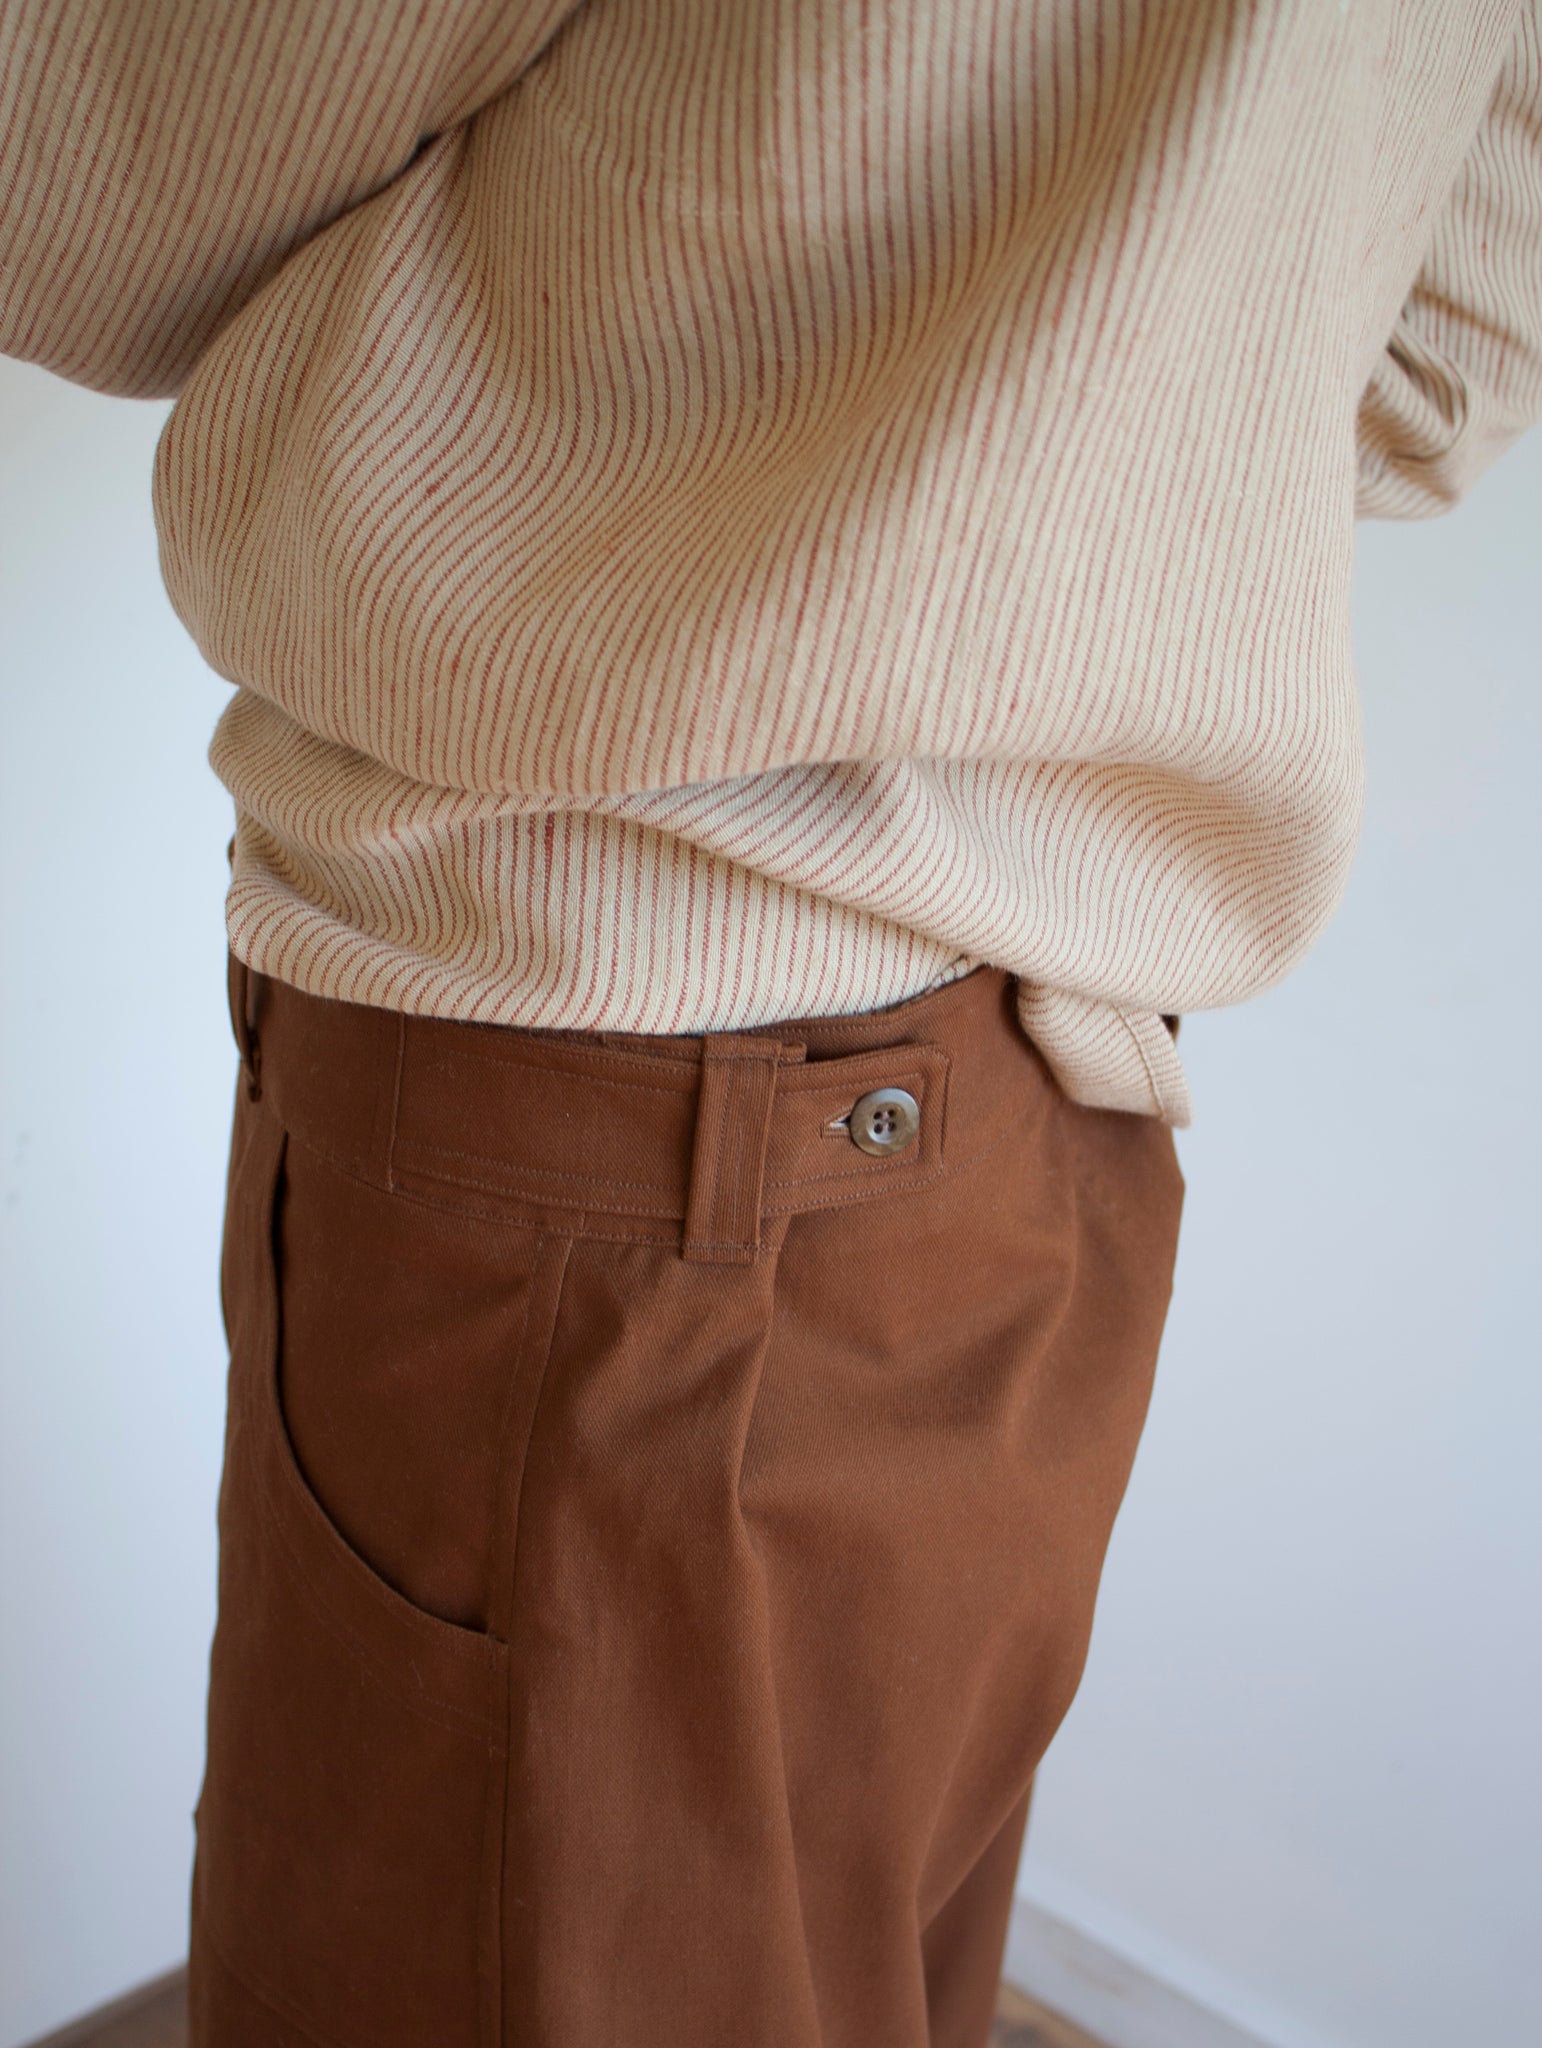 shop pajotten menswear close up image of the side view of a pair of chore trousers with side button fastening worn with a striped beige linen shirt